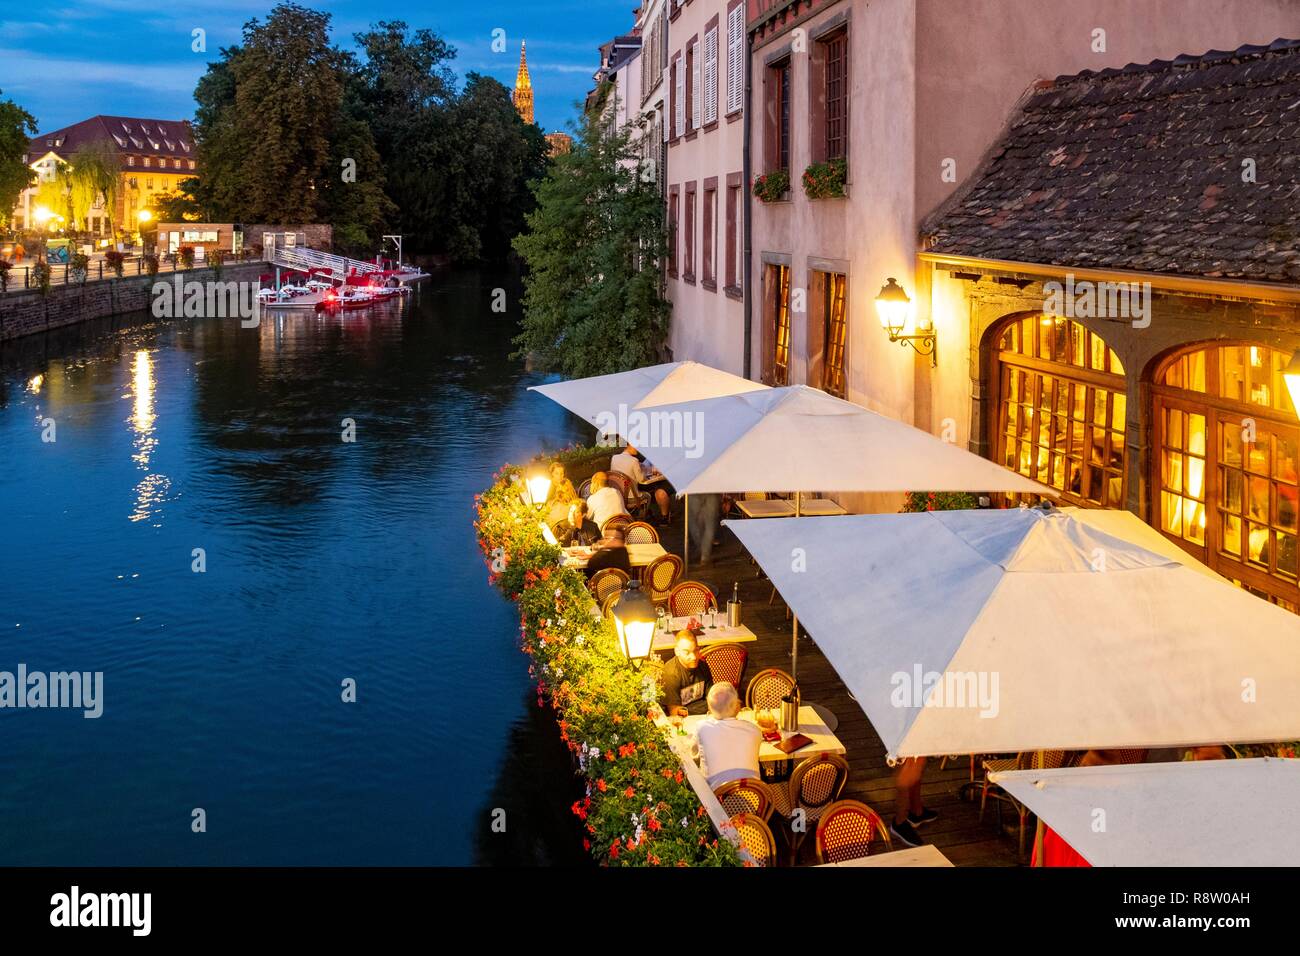 France, Bas Rhin, Strasbourg, old city listed as World Heritage by UNESCO, Marco  Polo Restaurant Stock Photo - Alamy